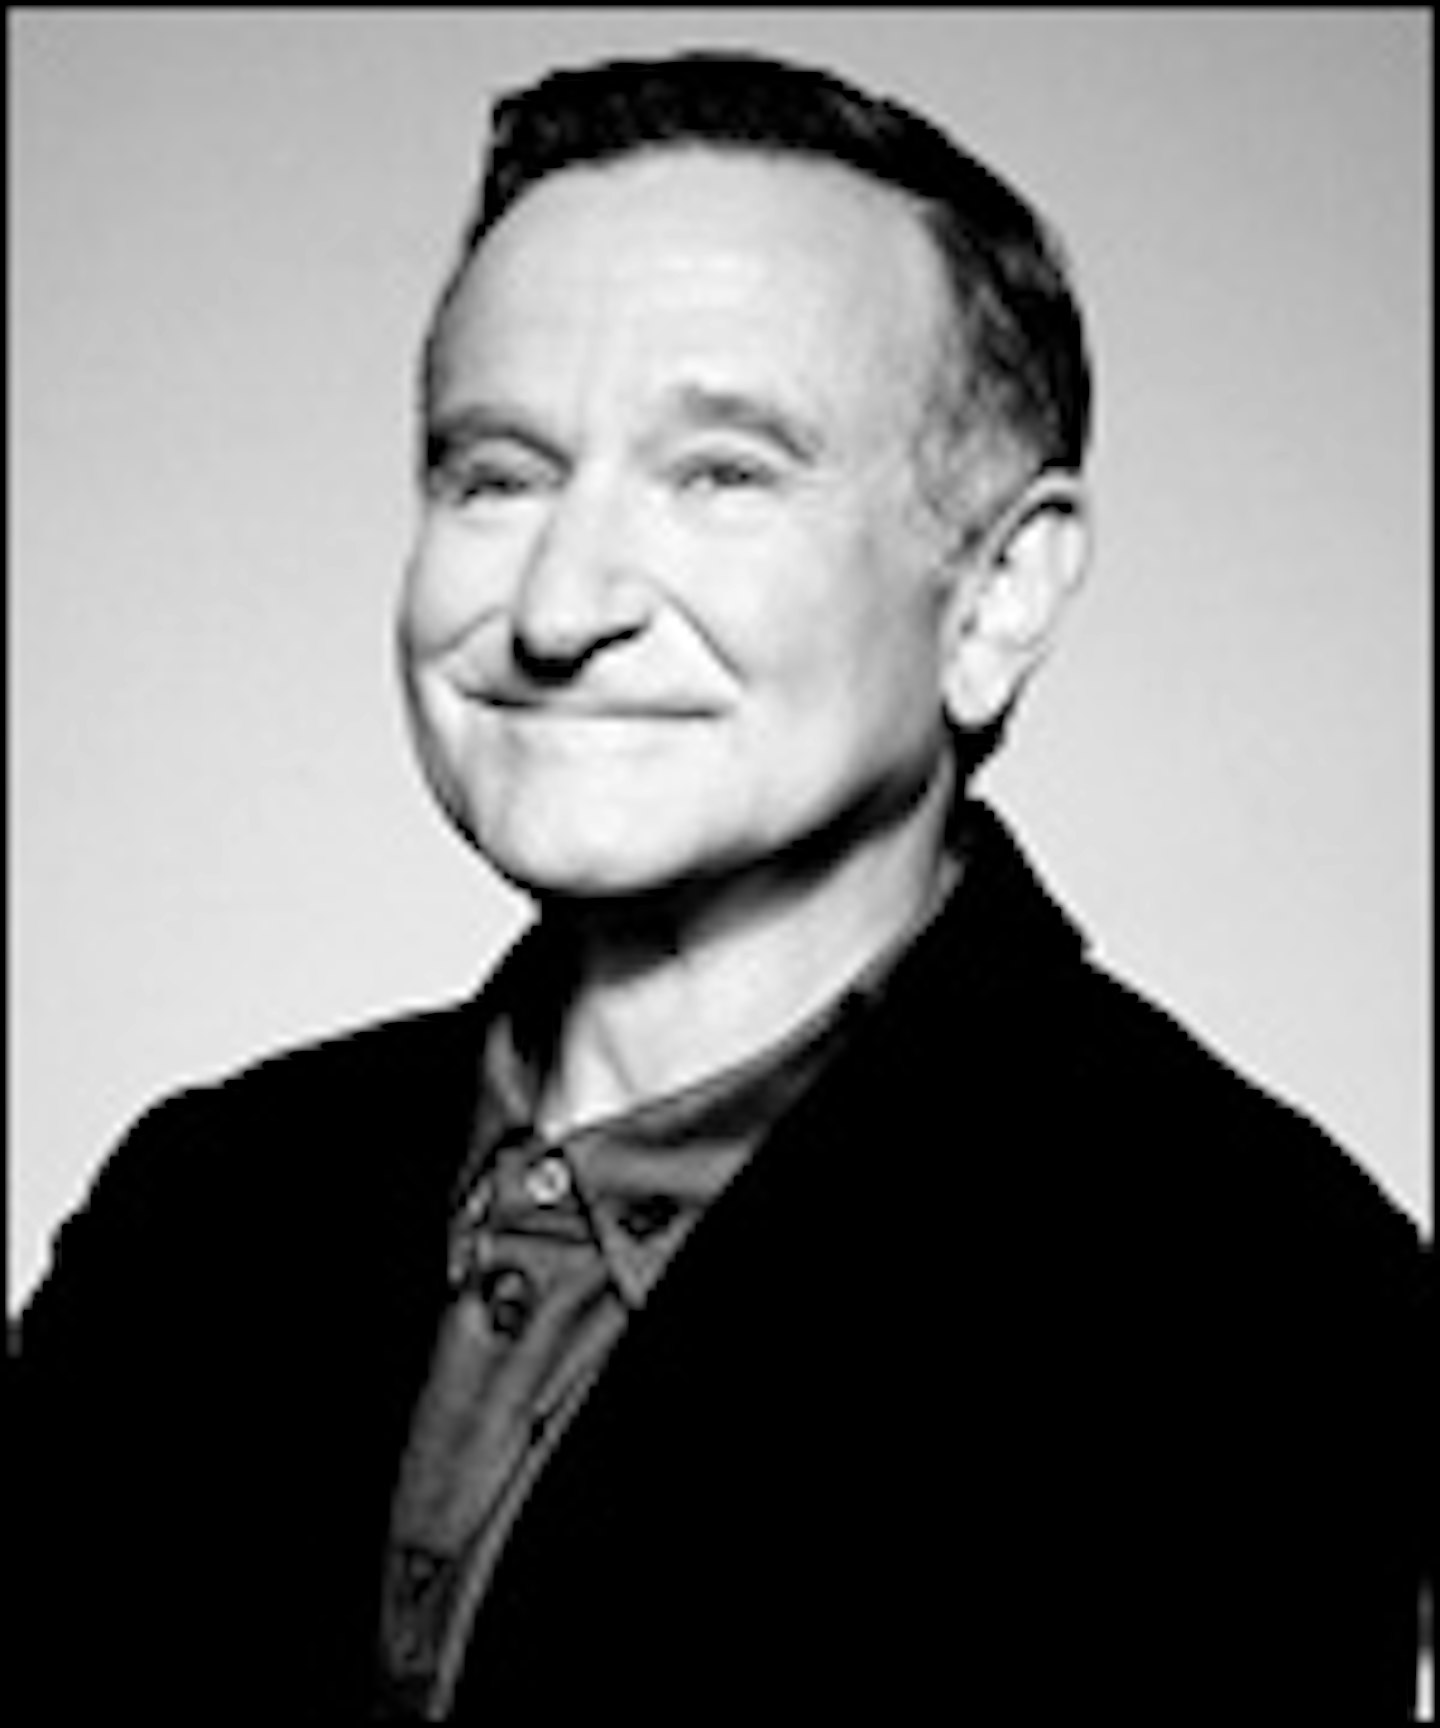 Robin Williams Completed His Voice Work On Absolutely Anything